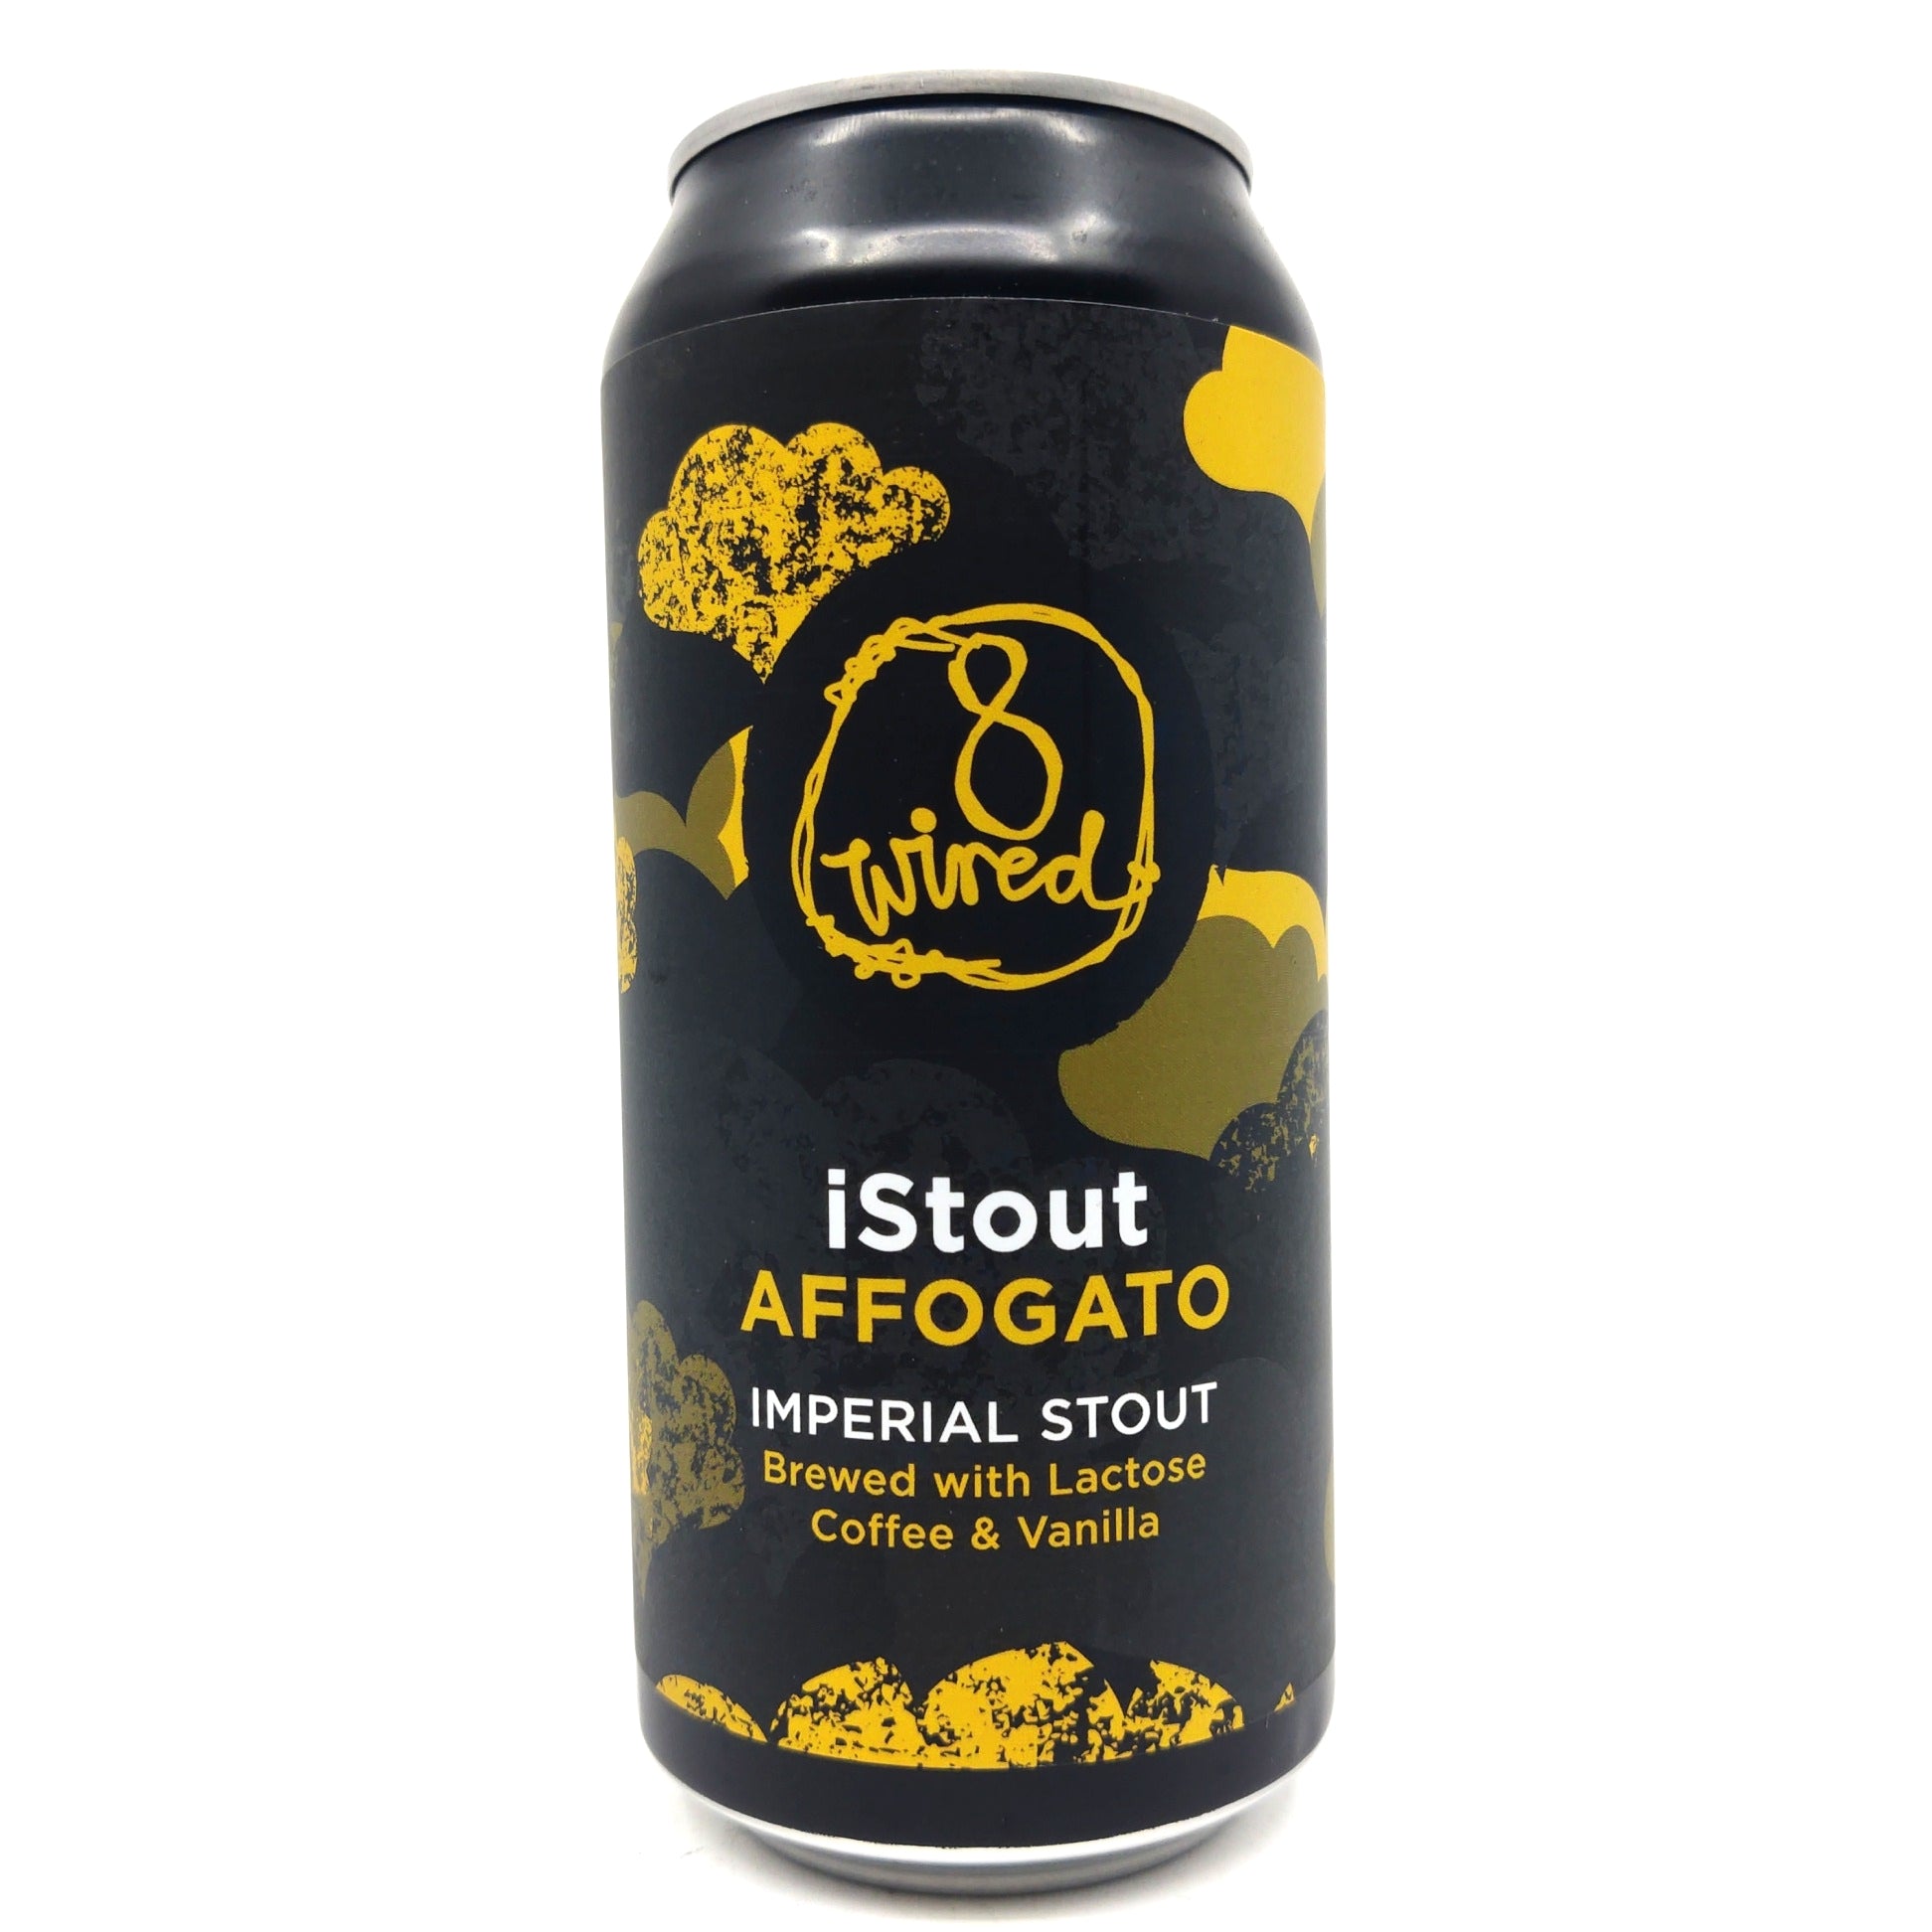 8 Wired iStout Affogato Imperial Stout 10% (440ml can)-Hop Burns & Black